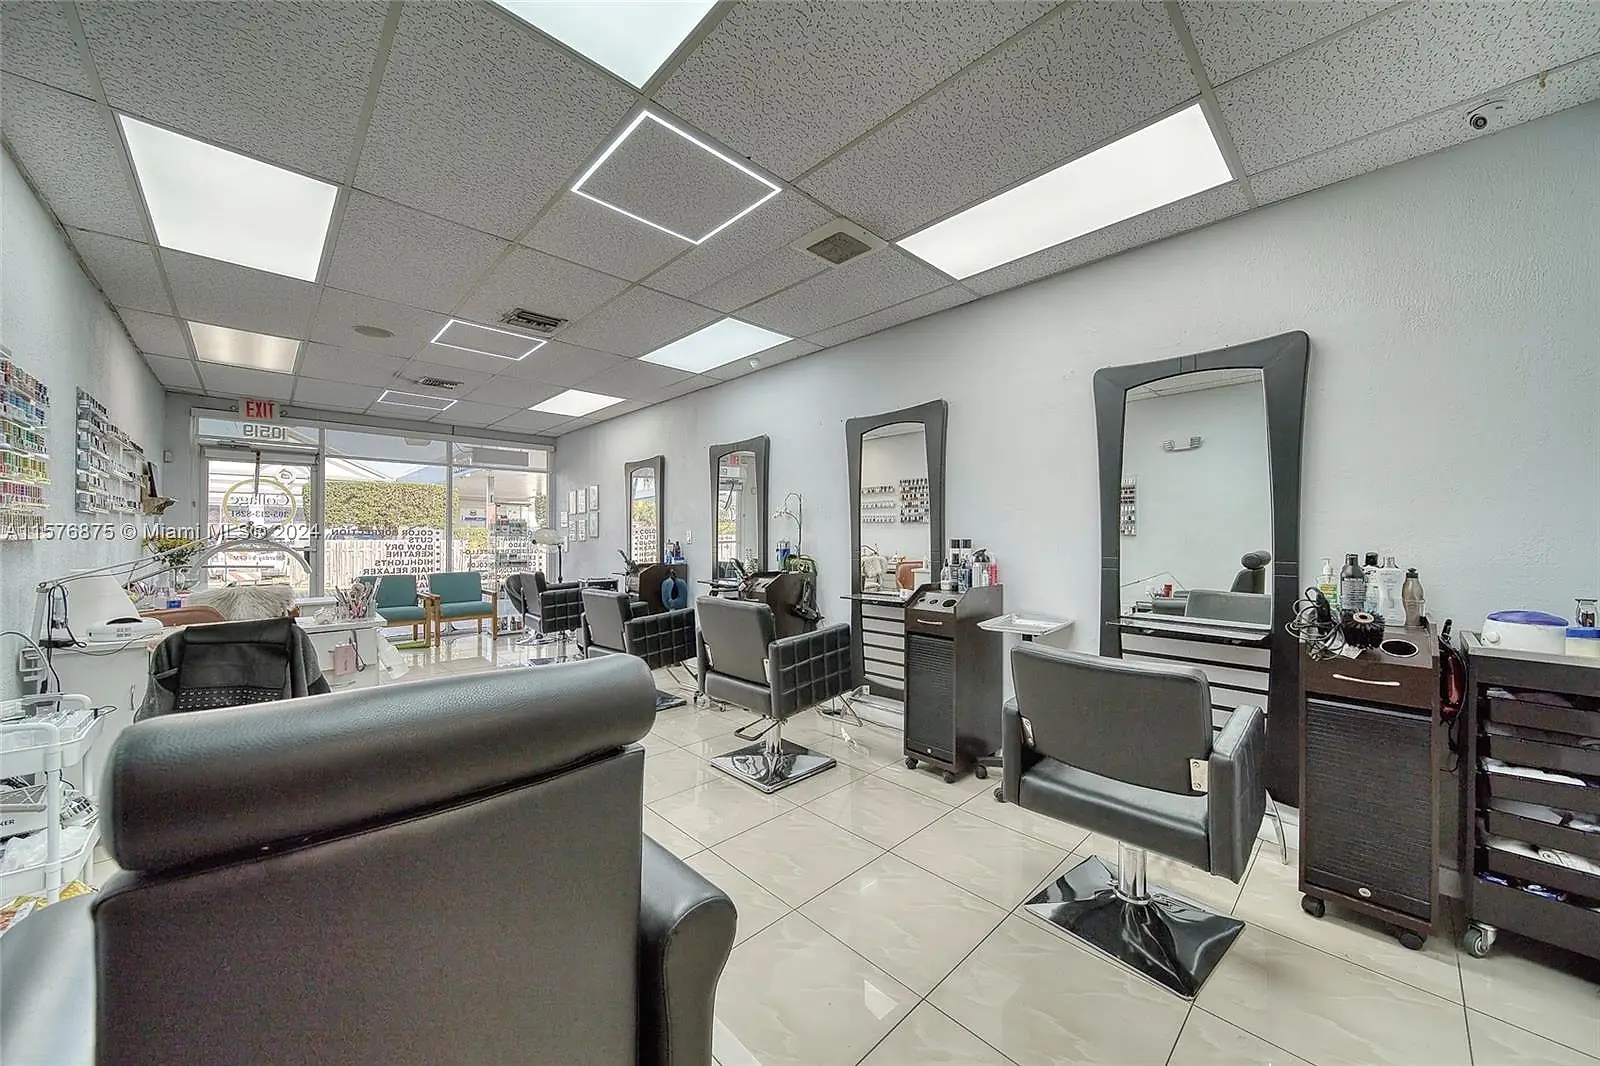 Beauty Salon/Barbershop For Sale On 107 And Bird Road